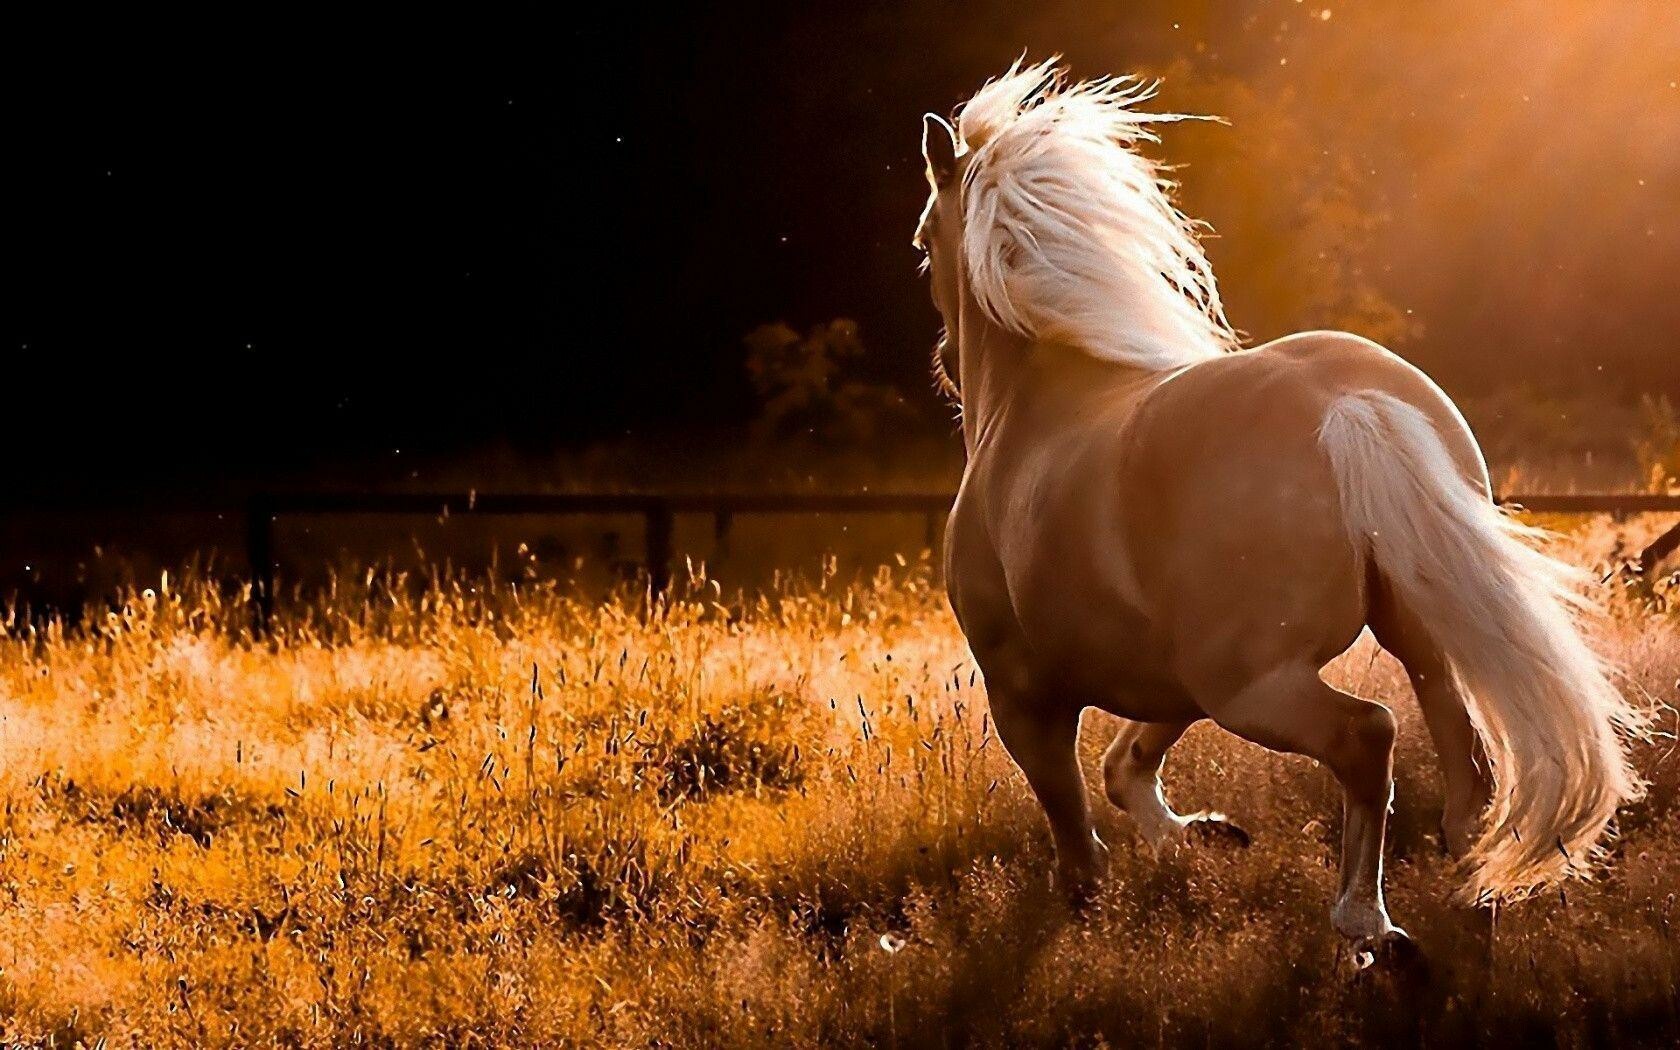 51+ Wild Horses Wallpapers: HD, 4K, 5K for PC and Mobile | Download free  images for iPhone, Android